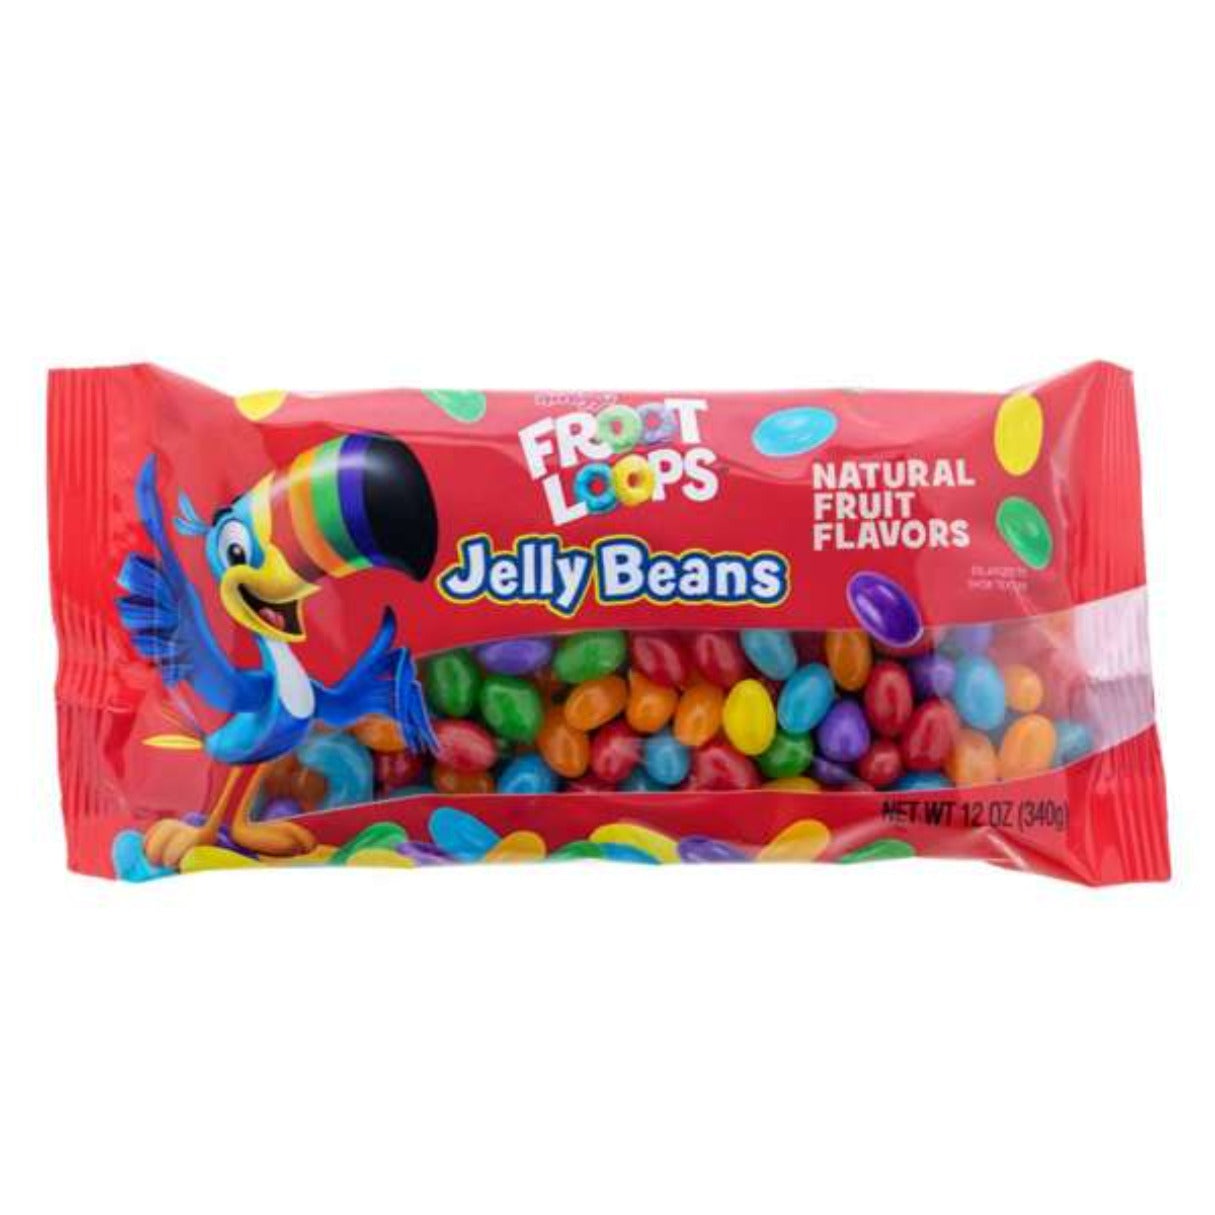 Galerie Froot Loops Bag of Jelly Beans  12oz - 21ct